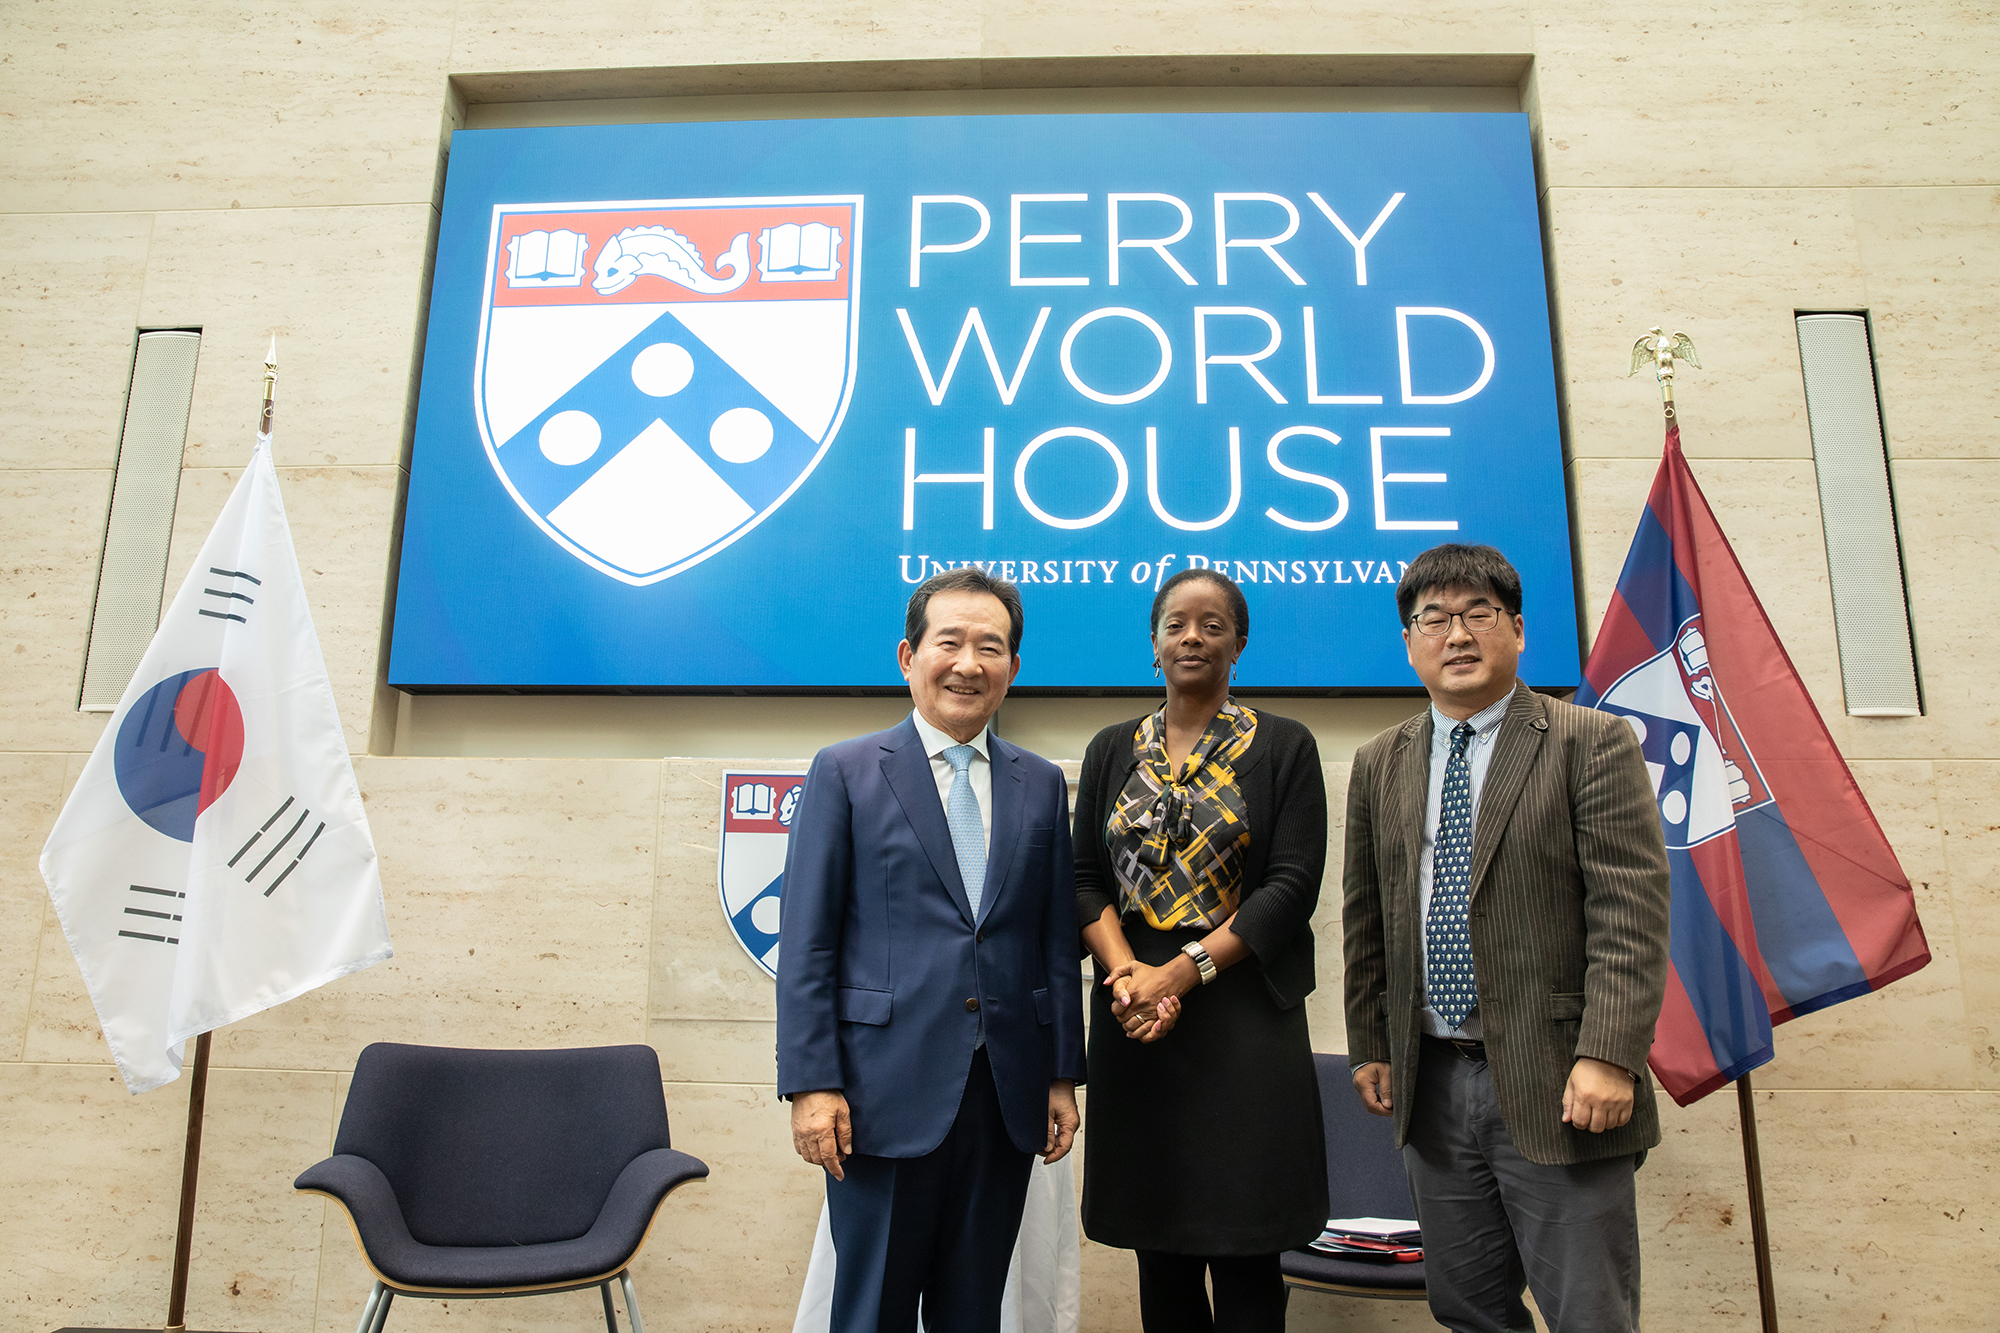 Chung Sye-kyun stands on stage at Perry World House with two other people presenting the talk.